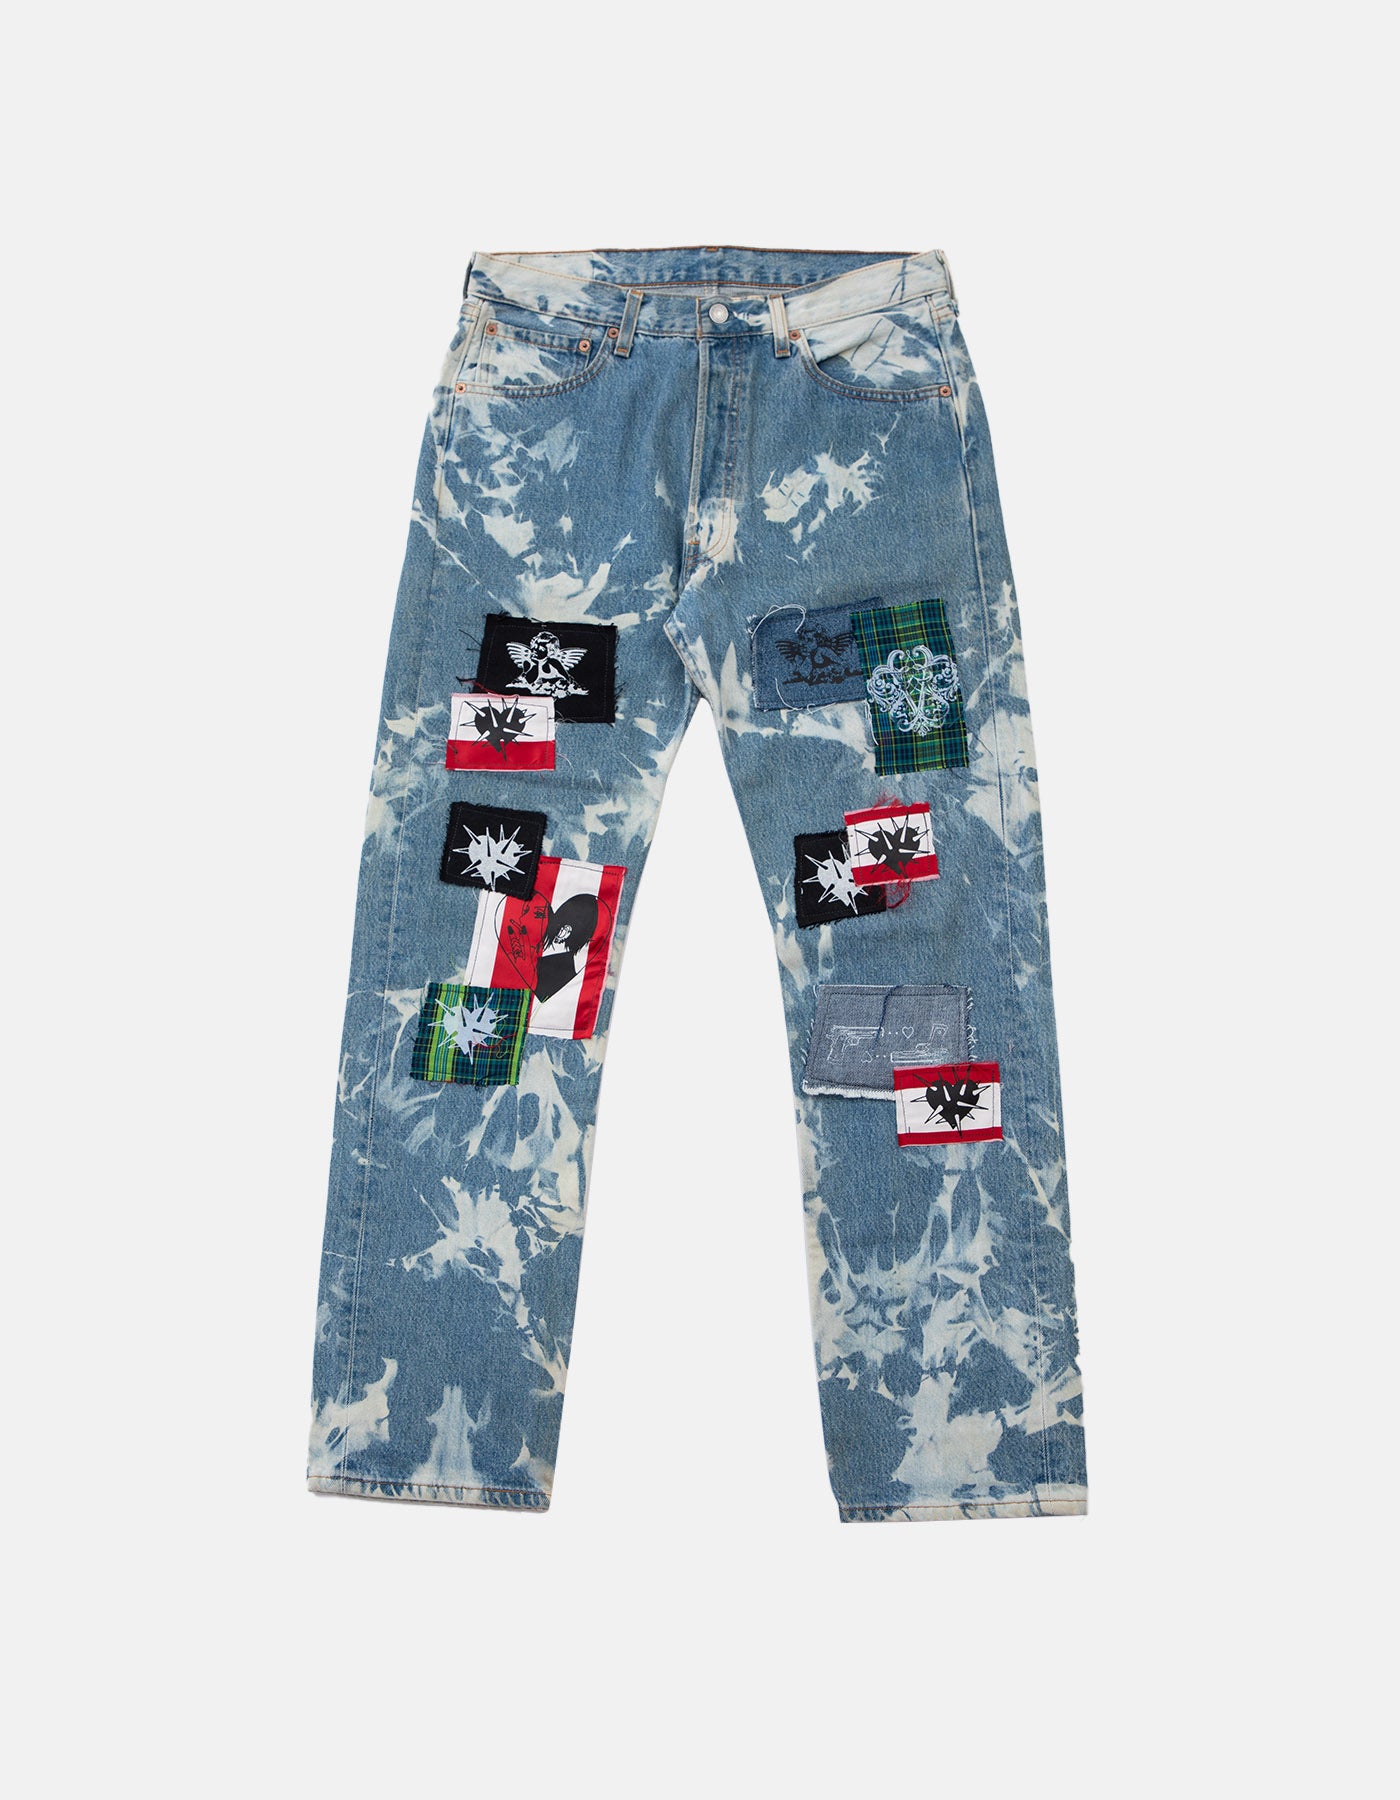 DB Decolorized Denim with Patches in Blue